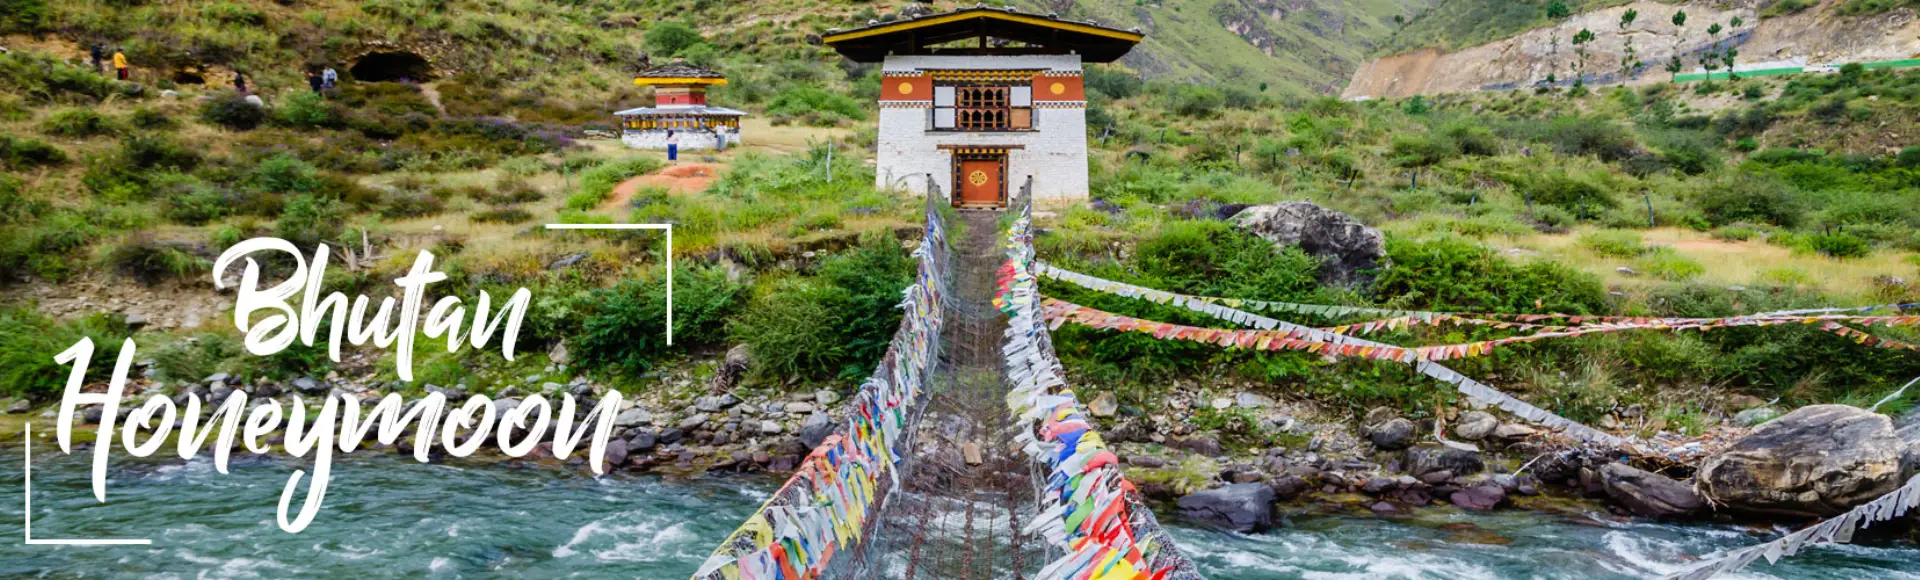 Bhutan tours holiday packages